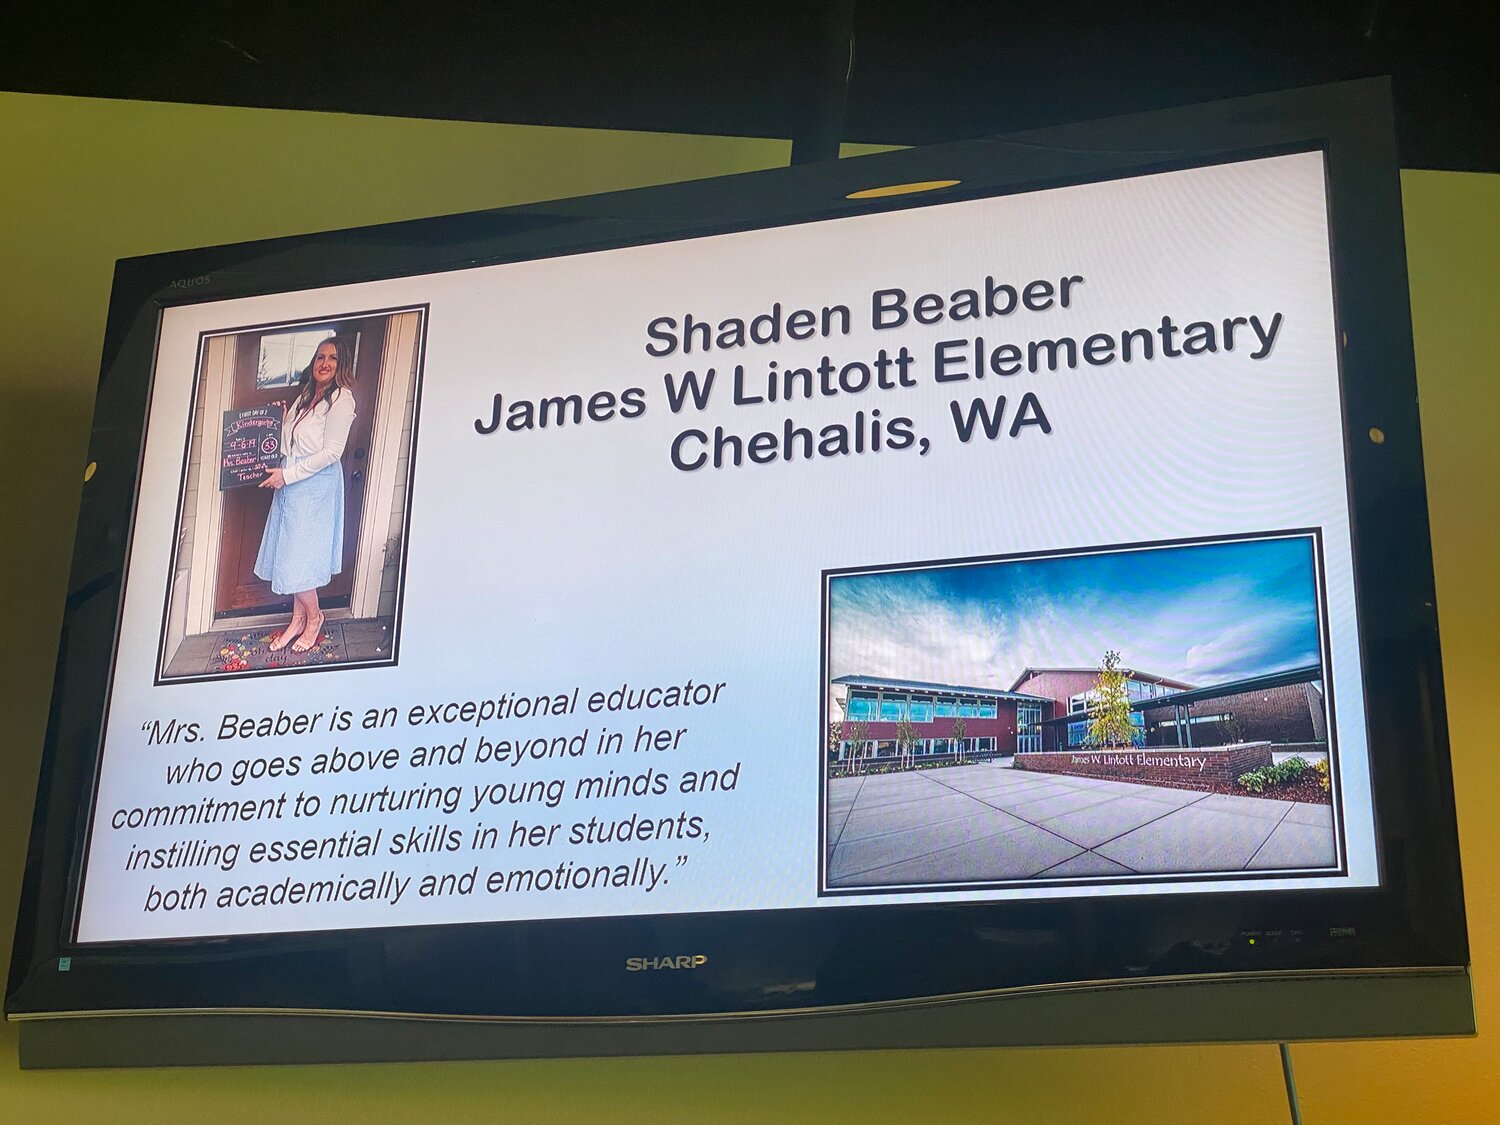 Shaden Beaber was honored at a Seattle Mariners game on Aug. 27 and received a $1,000 award, $500 of which went to Lintott Elementary School as a classroom grant.